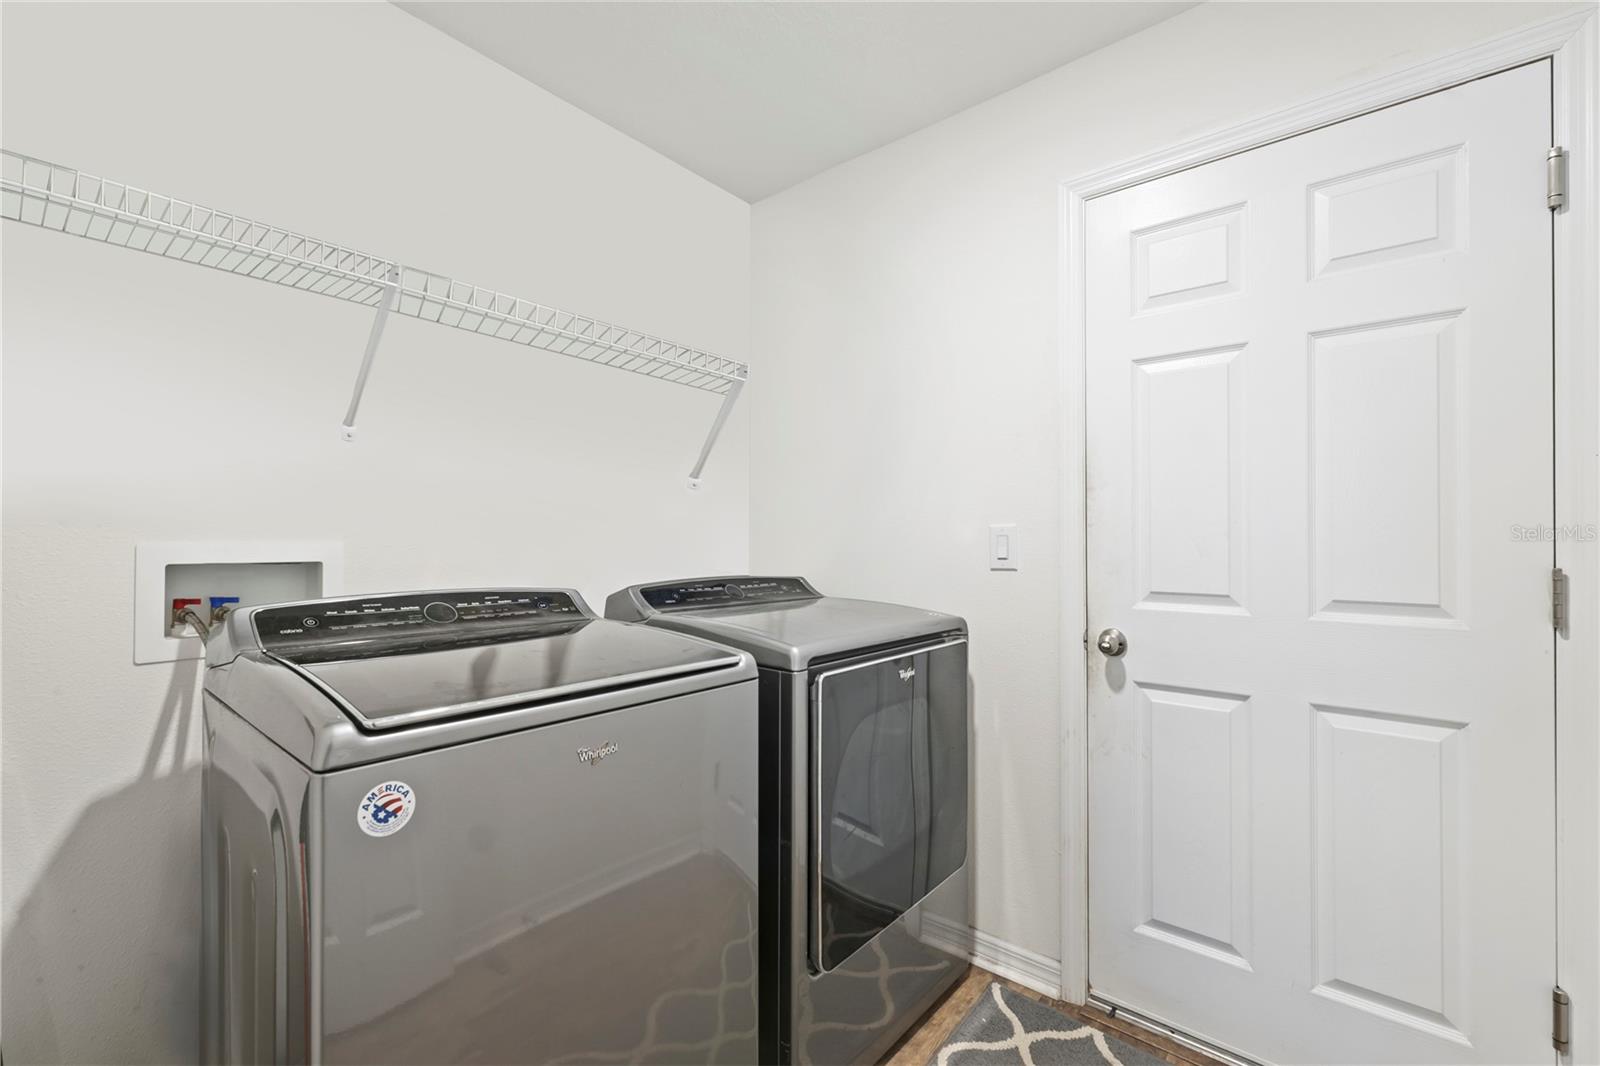 LAUNDRY ROOM (UPGRADED APPLIANCE)